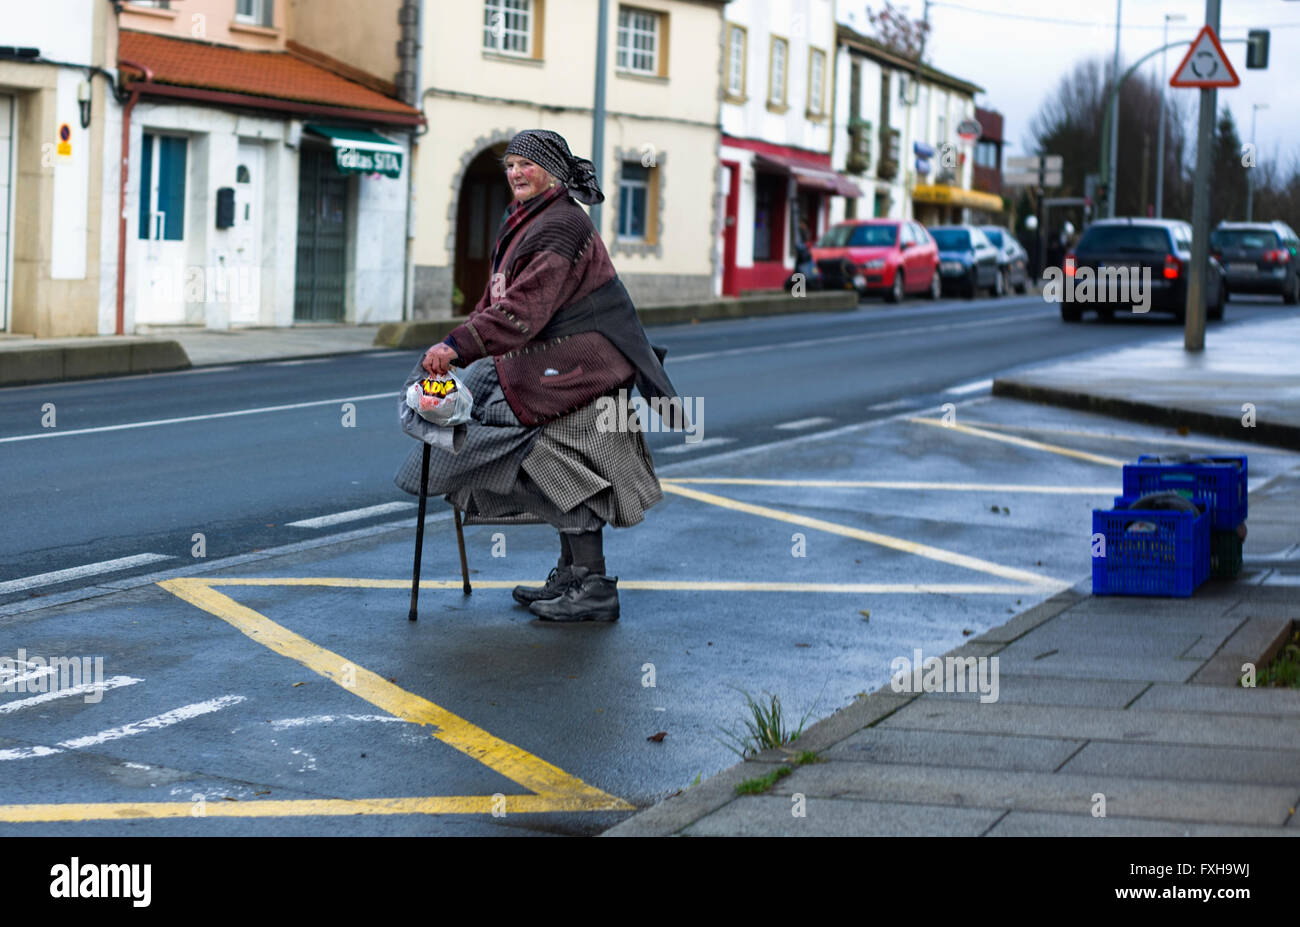 SANTIAGO DE COMPOSTELA CITY, SPAIN - DEC 22: Spain northern cold winter. An old woman in urban outdoor scene waiting the bus aft Stock Photo